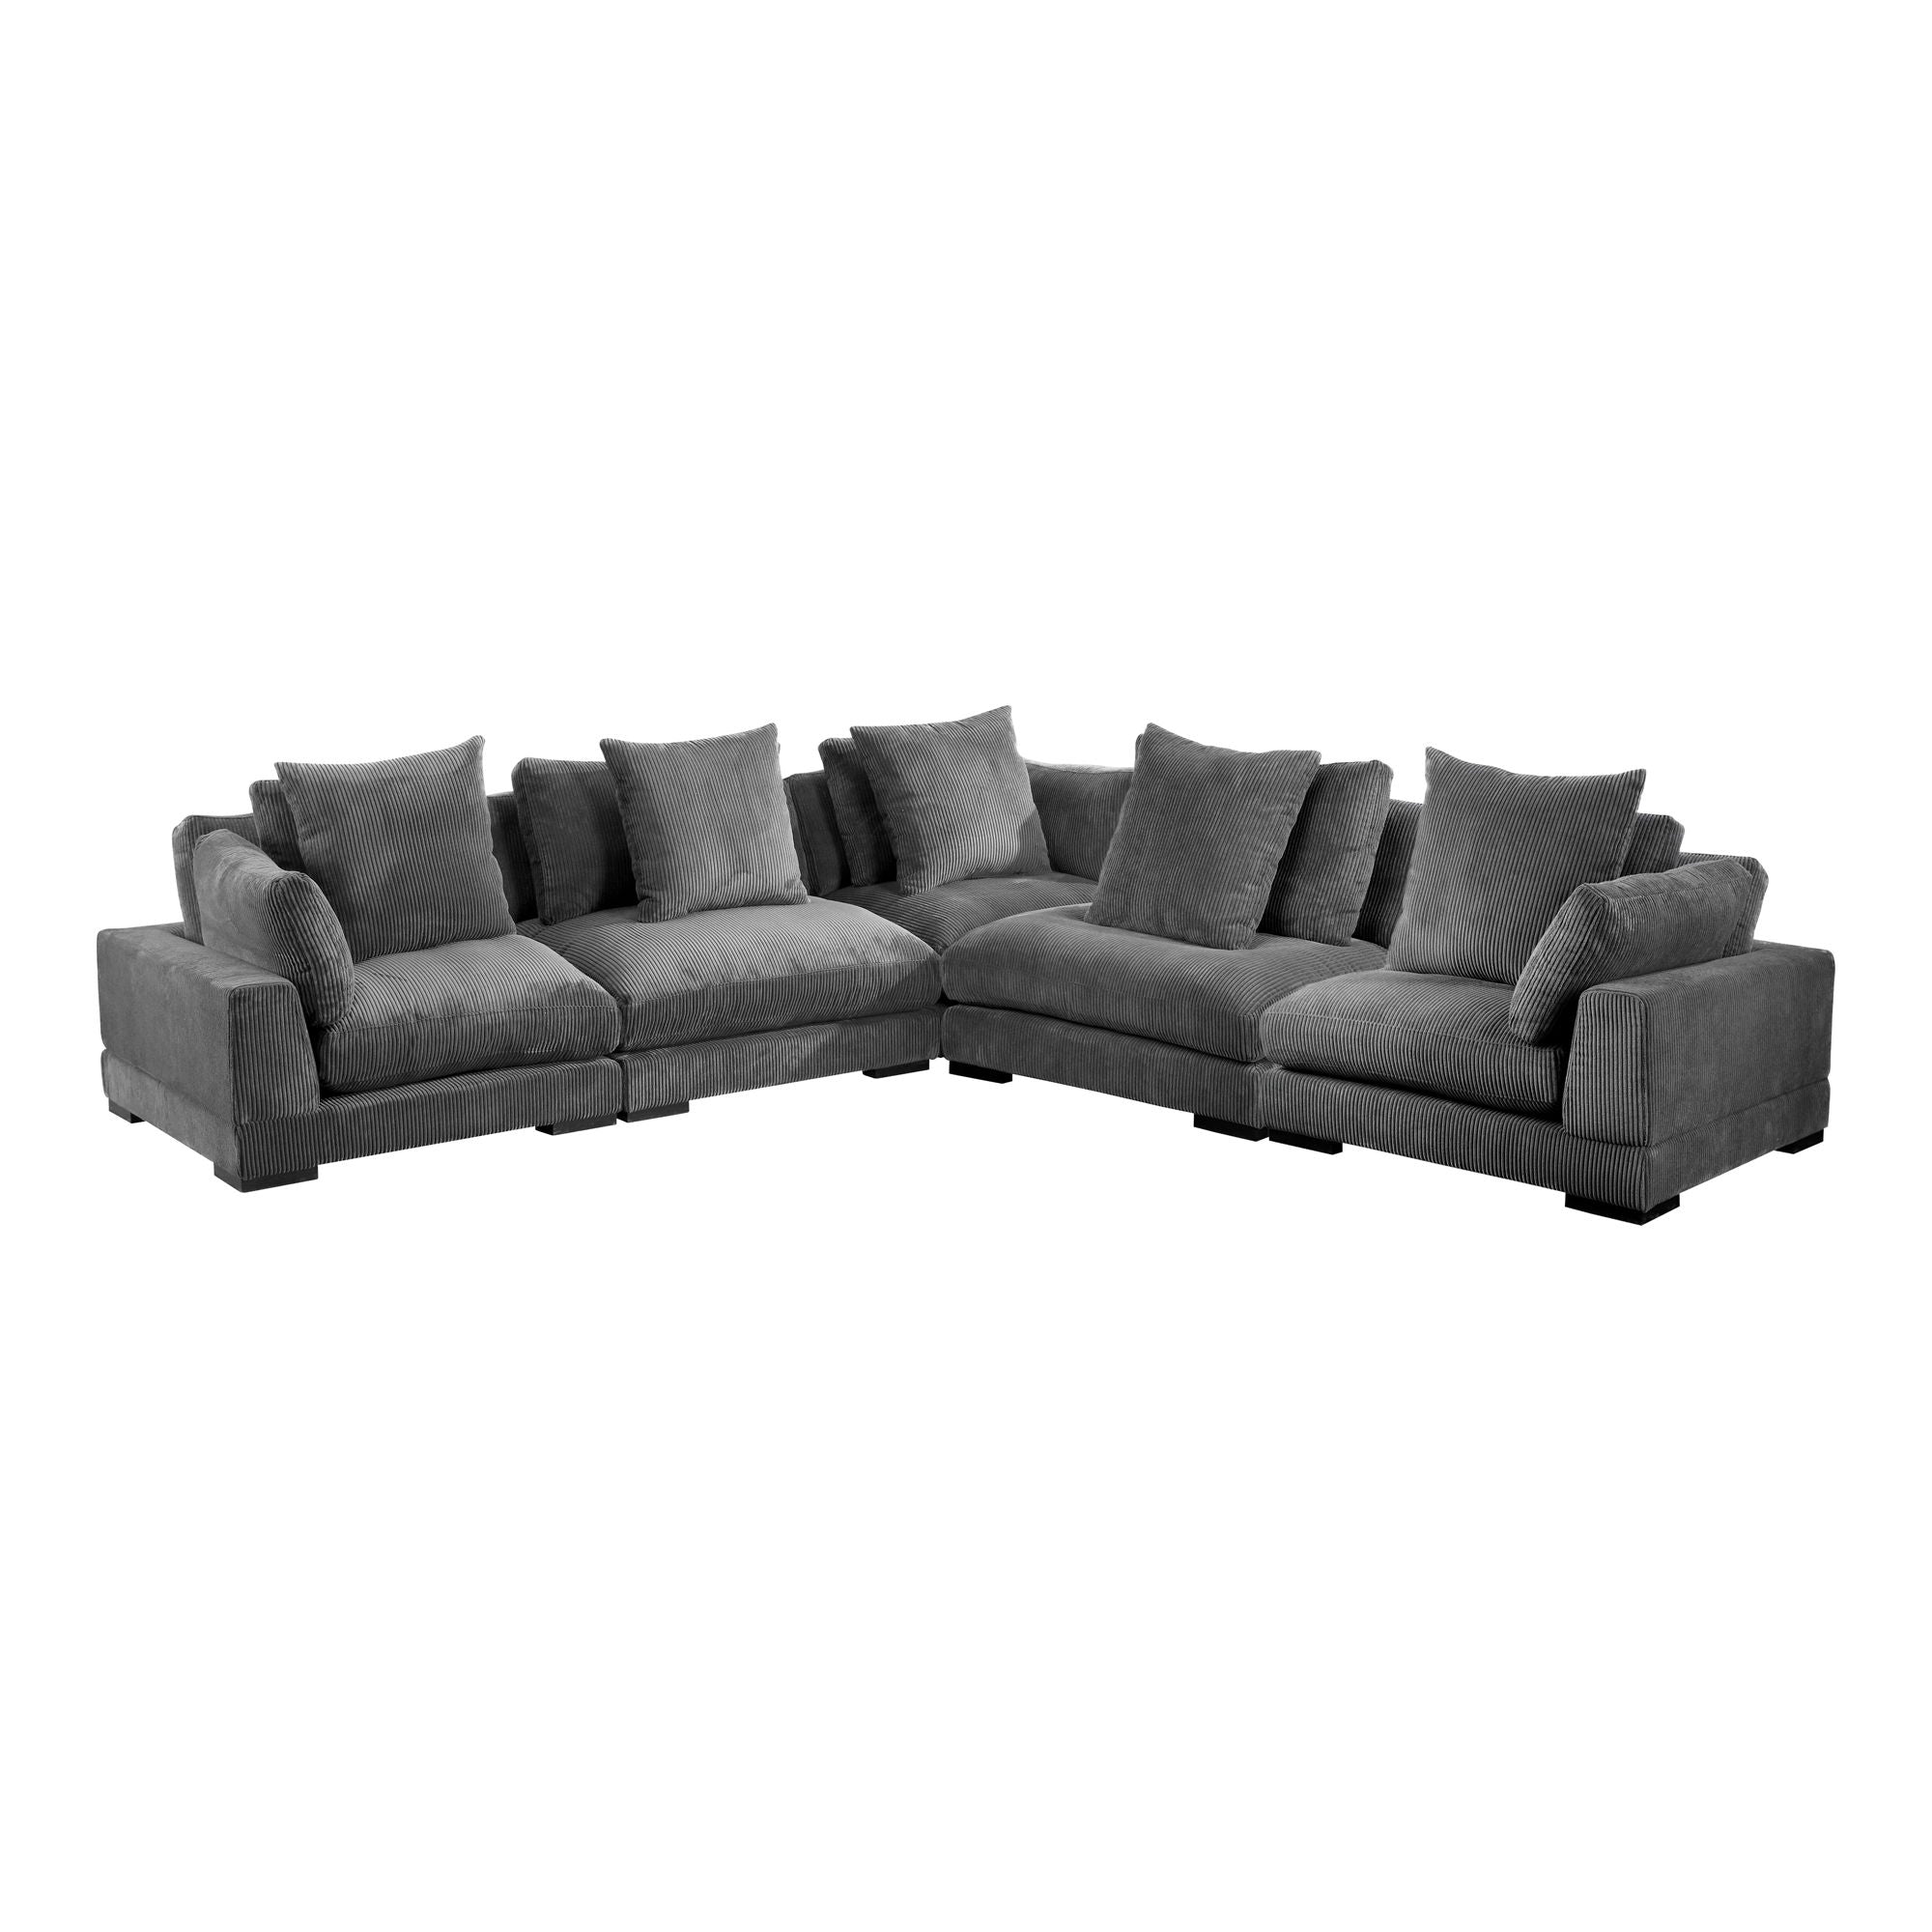 Tumble Charcoal Corduroy L Sectional Modular-Stationary Sectionals-American Furniture Outlet